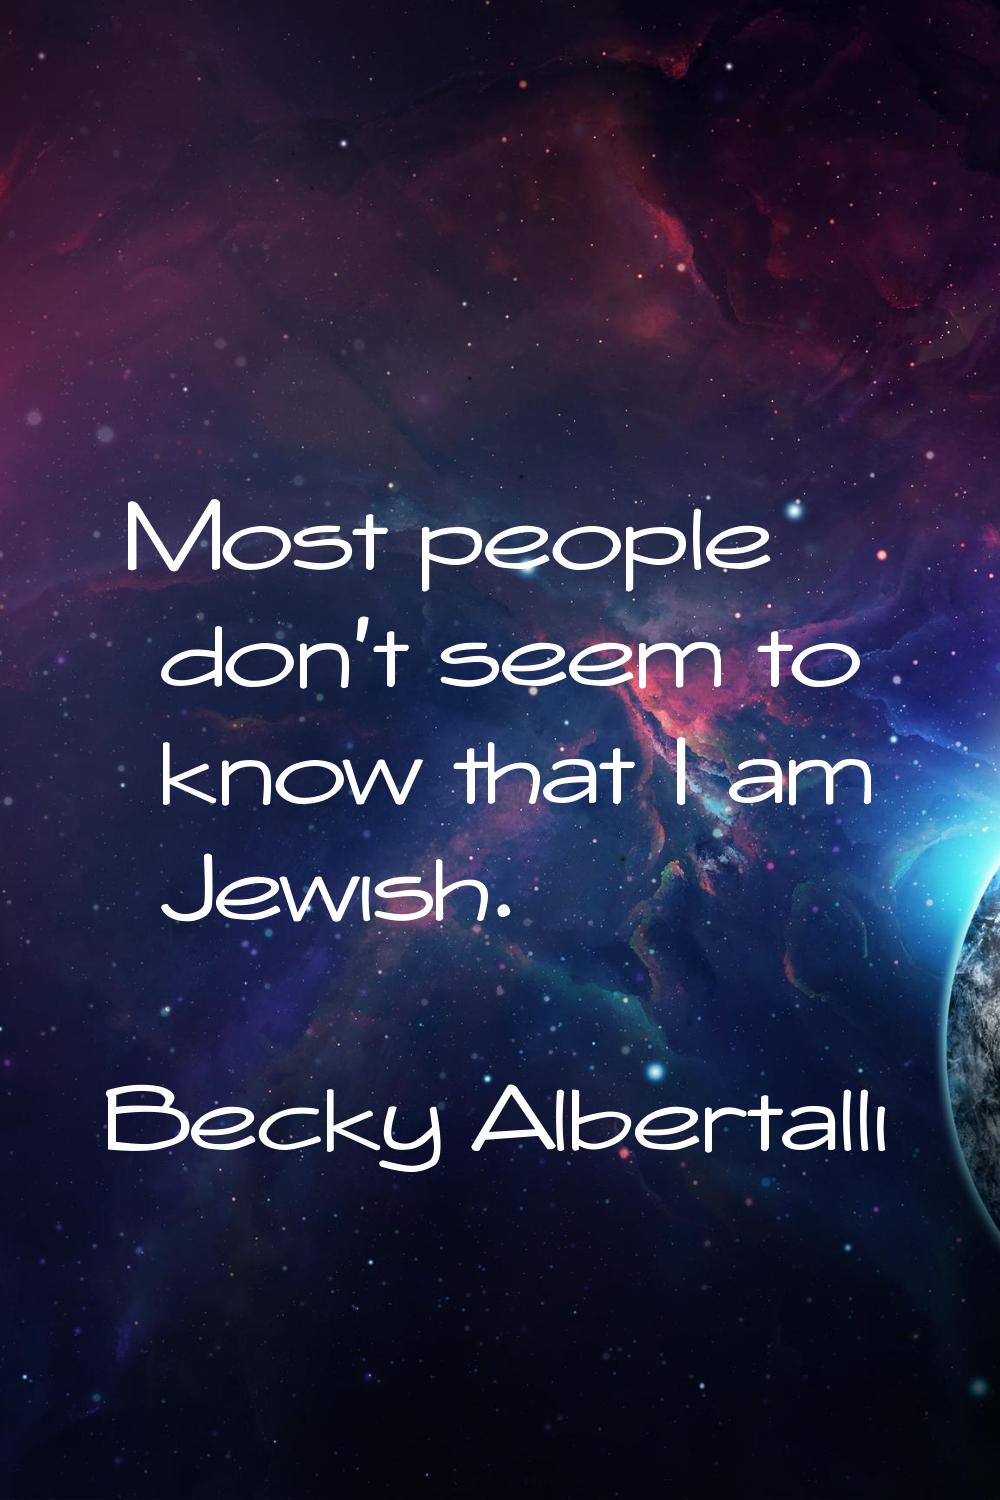 Most people don't seem to know that I am Jewish.